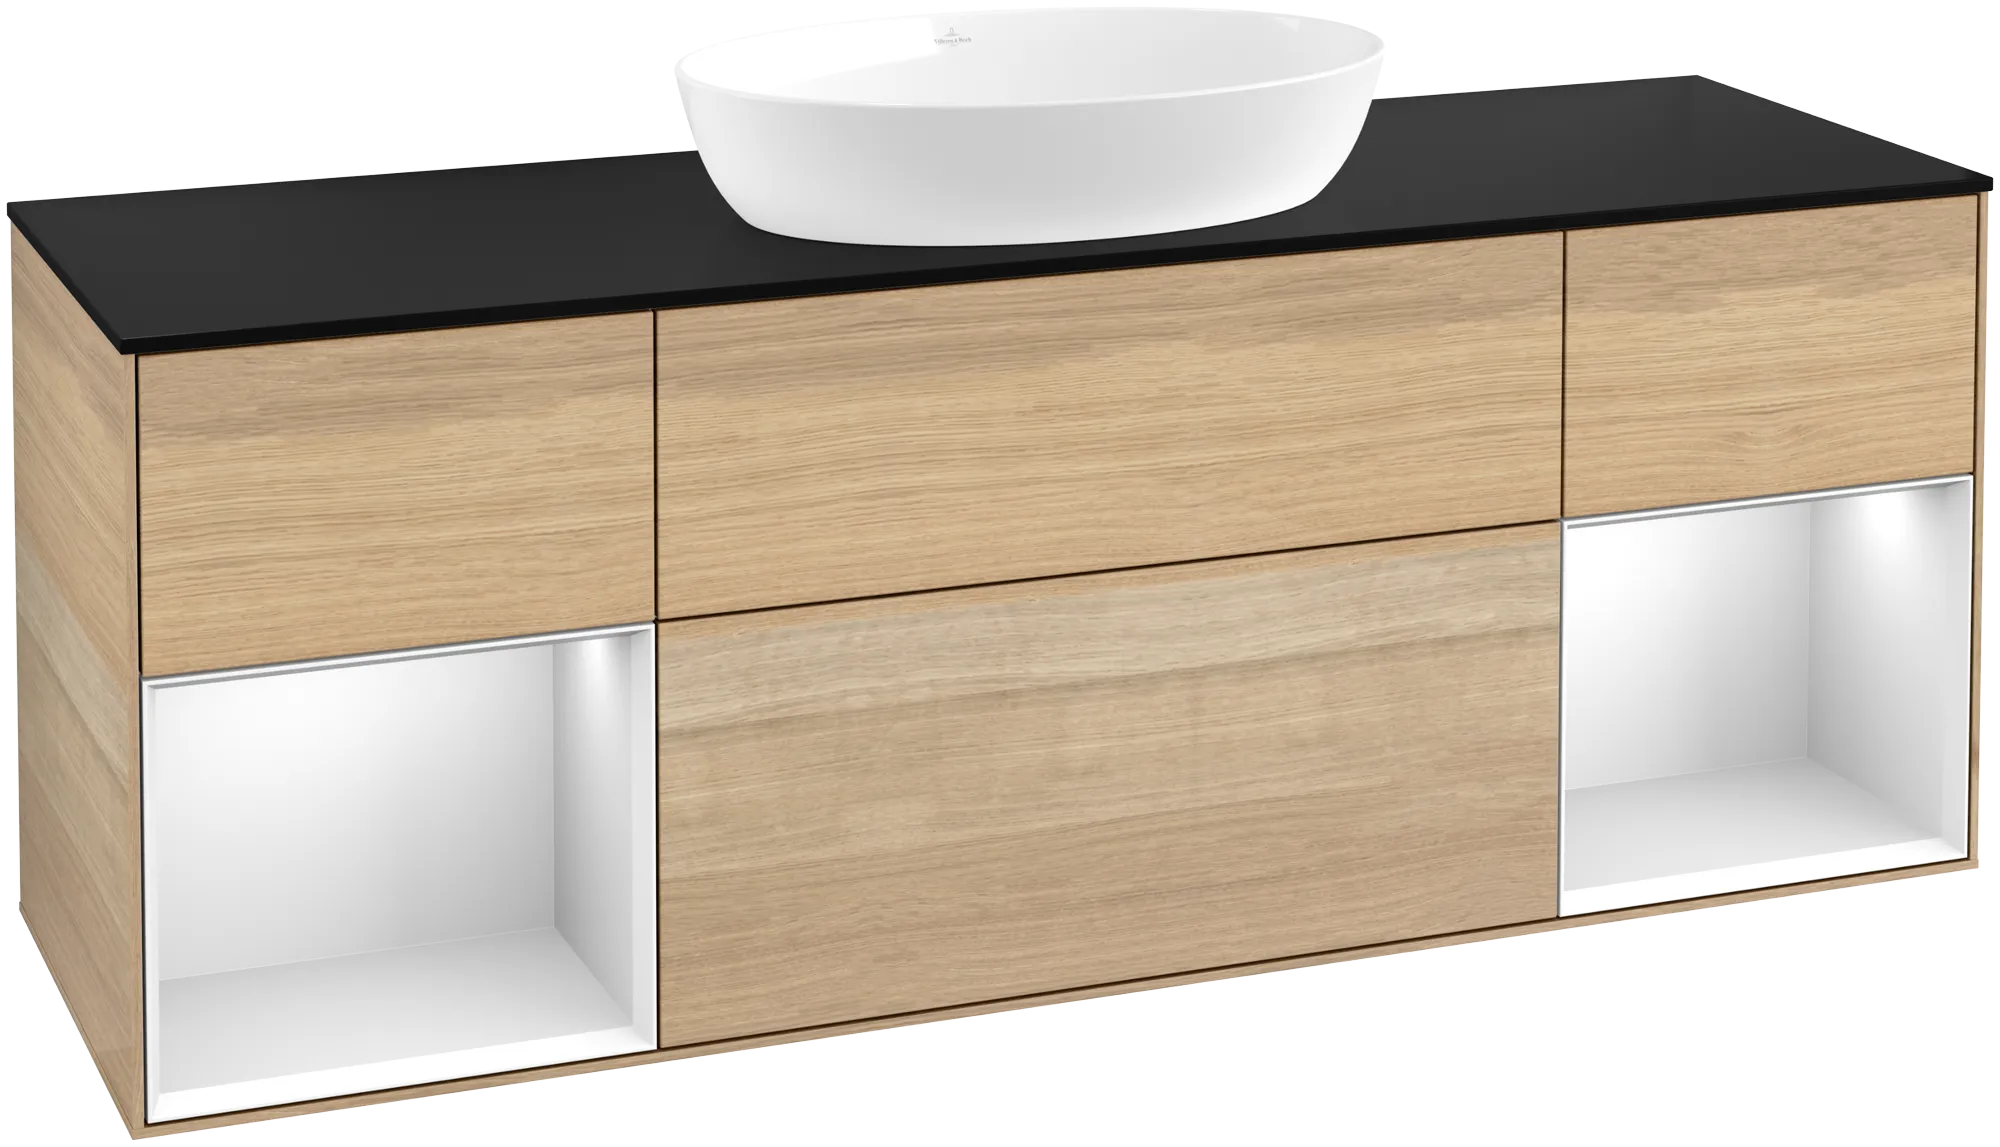 Picture of VILLEROY BOCH Finion Vanity unit, with lighting, 4 pull-out compartments, 1600 x 603 x 501 mm, Oak Veneer / White Matt Lacquer / Glass Black Matt #FD02MTPC